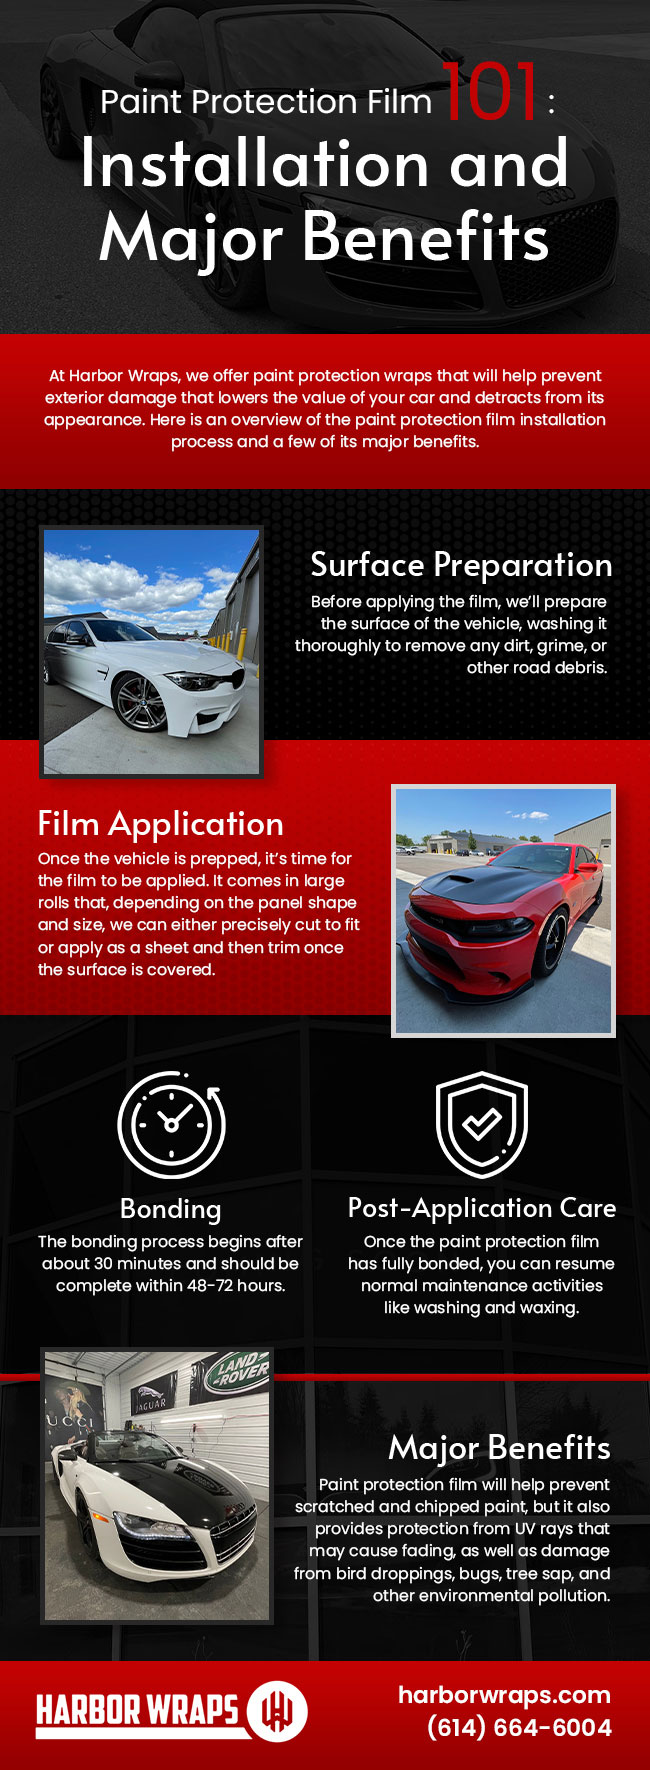 Paint Protection Film 101: Installation and Major Benefits